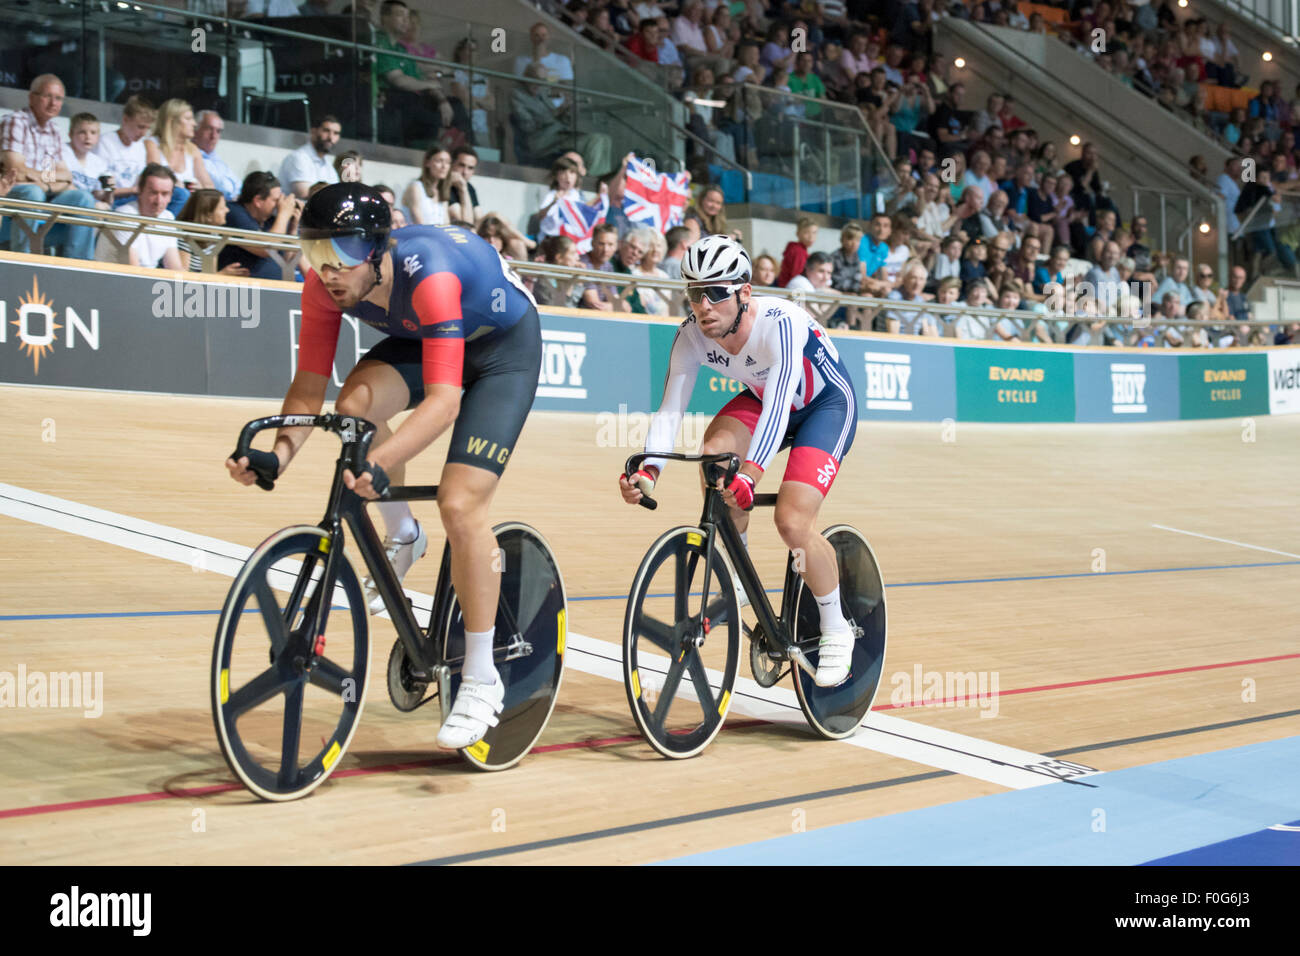 Derby, UK. 15th Aug, 2015. Jon Dibben leads Mark Cavendish as they compete in the scratch race in the omnium during the Revolution Series at Derby Arena, Derby, United Kingdom on 15 August 2015. The Revolution Series is a professional track racing series featuring many of the world's best track cyclists. This event, taking place over 3 days from 14-16 August 2015, is an important preparation event for the Rio 2016 Olympic Games, allowing British riders to score qualifying points for the Games. Credit:  Andrew Peat/Alamy Live News Stock Photo